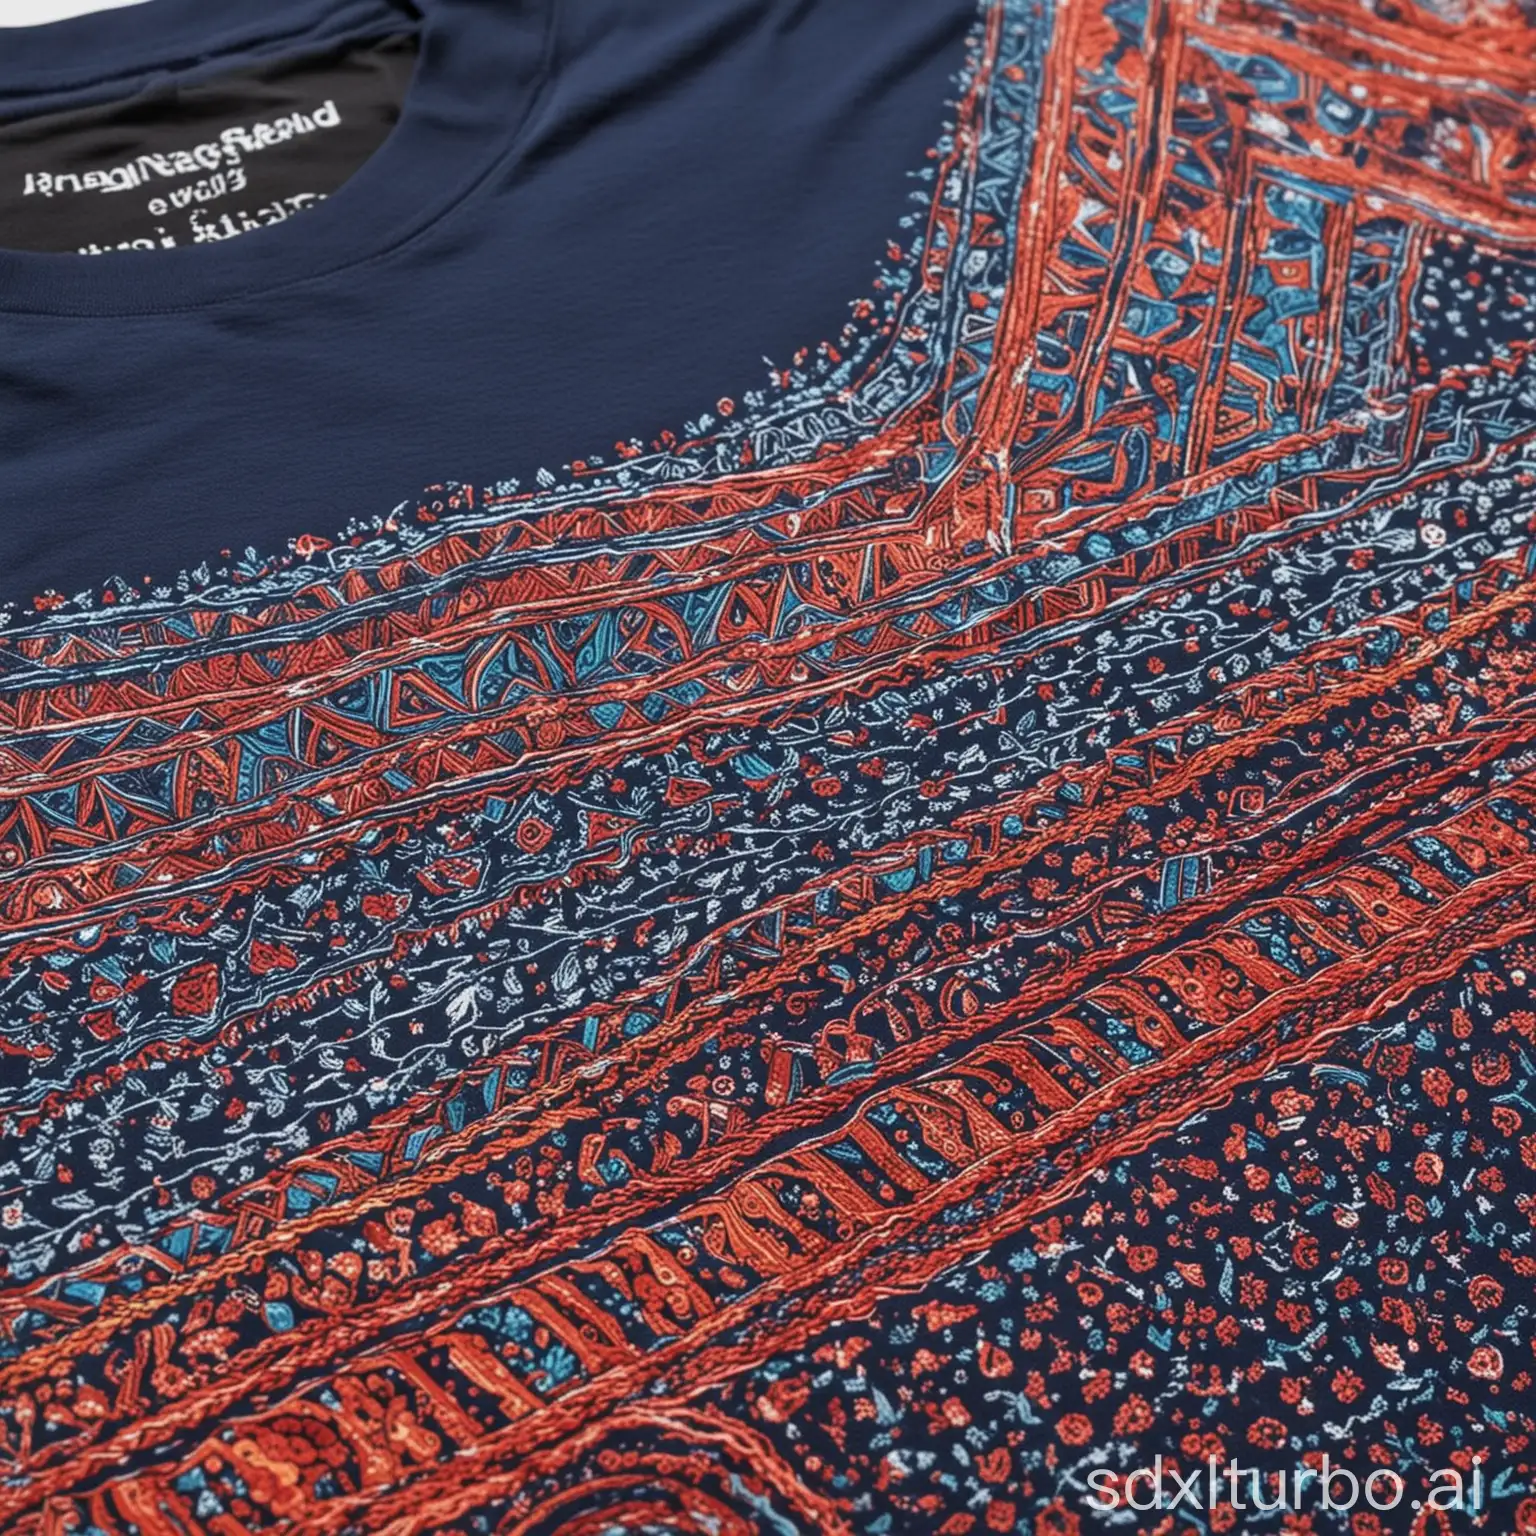 A close-up of a soft and colorful T-shirt, showing its intricate design and high-quality fabric.